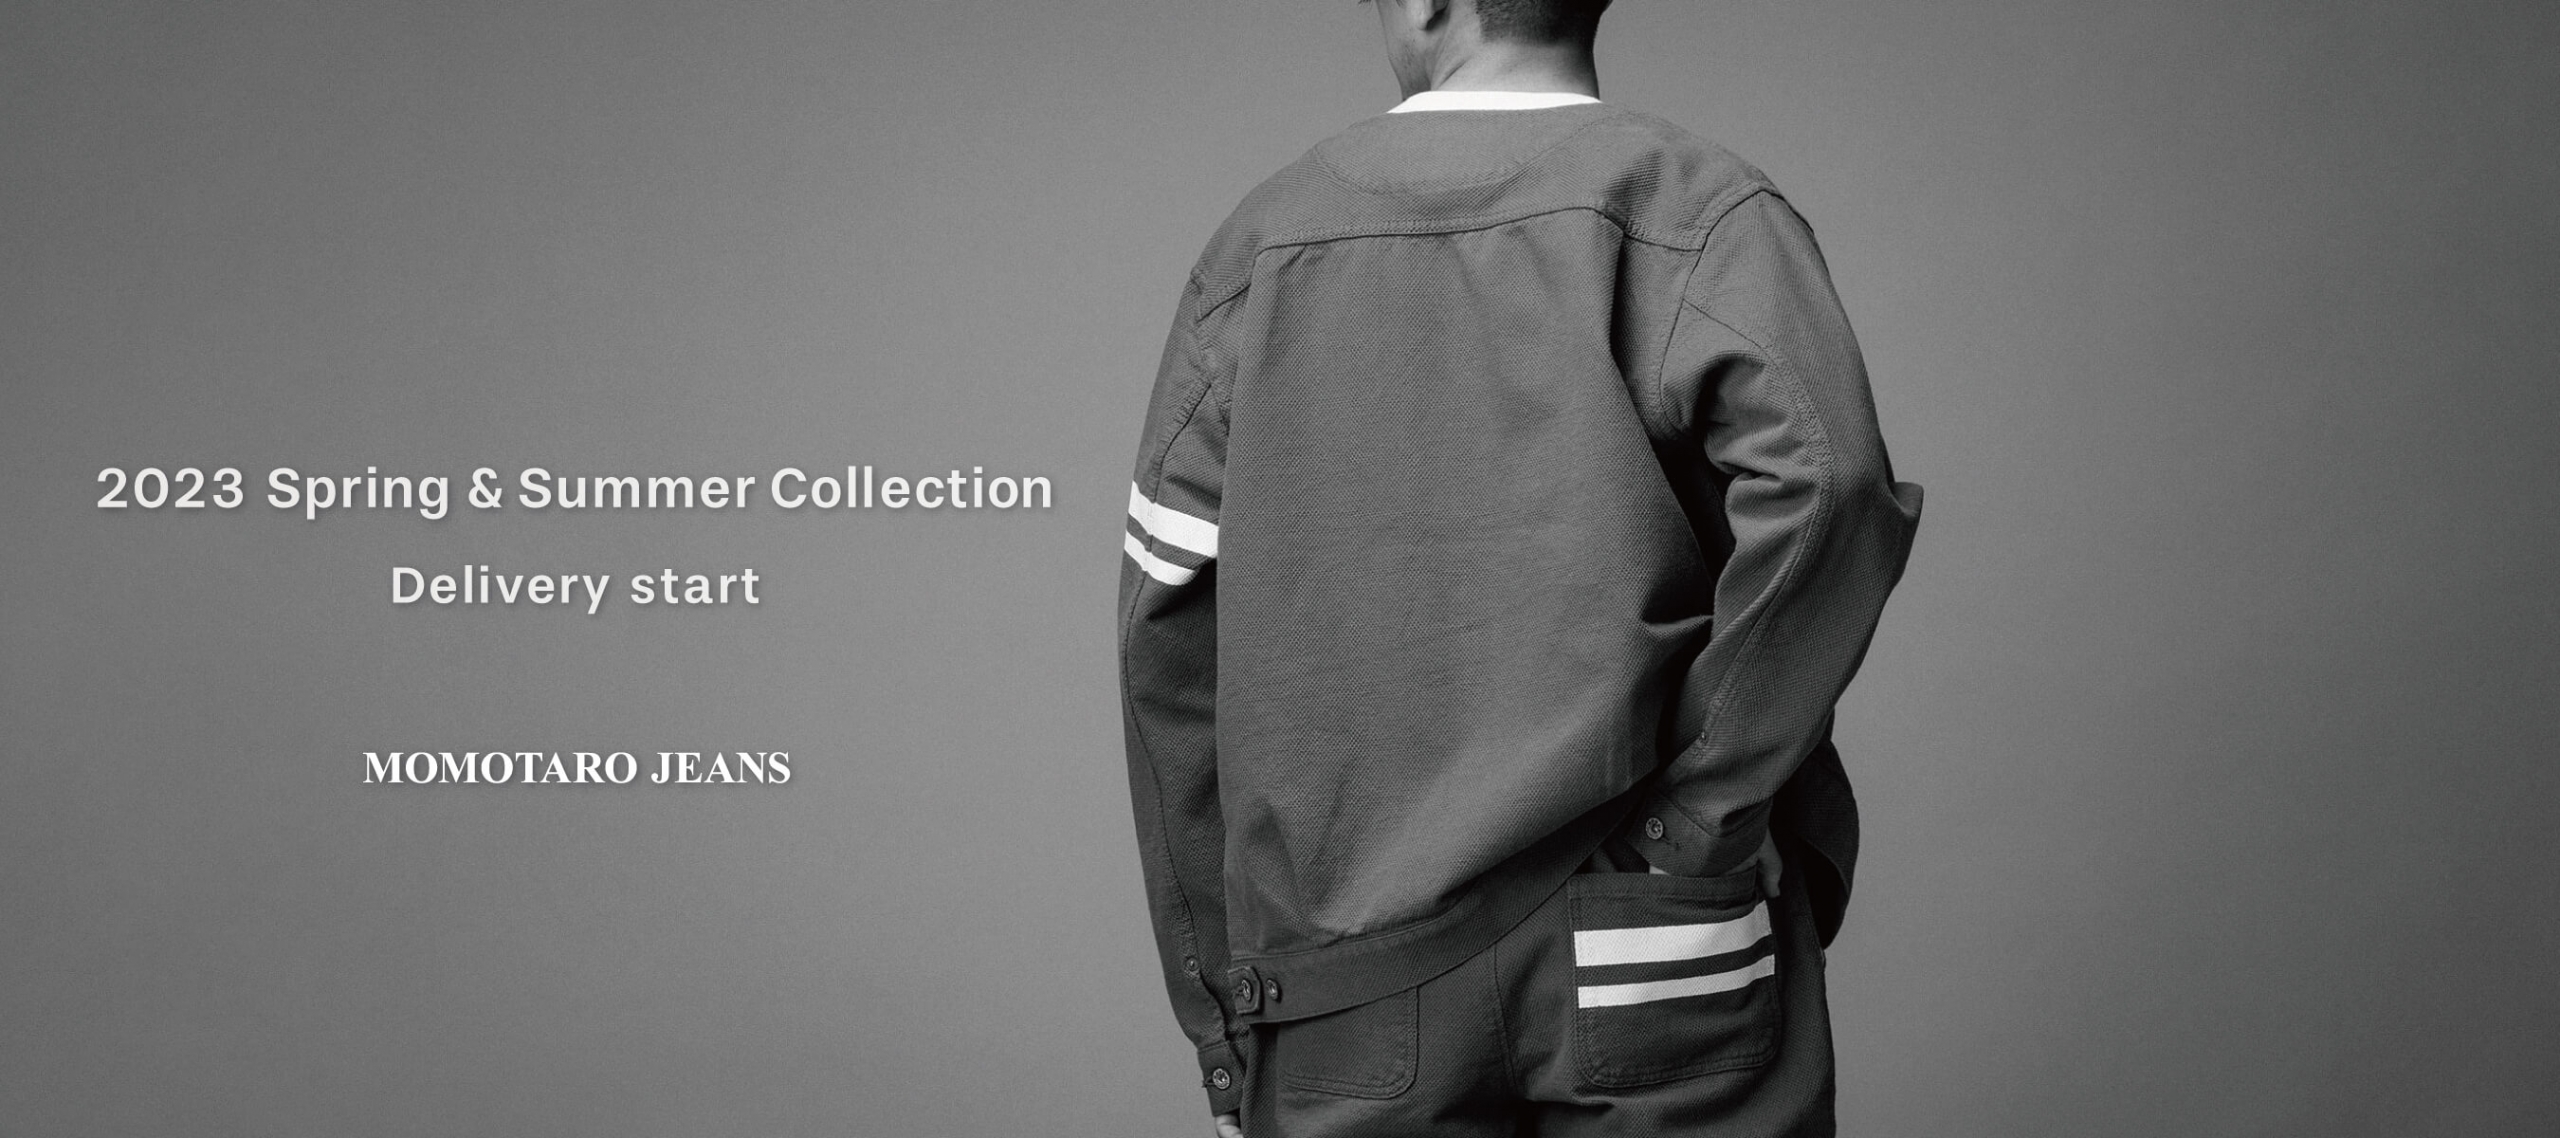 2023 Spring & Summer Collection Delivery start MOMOTARO JEANS